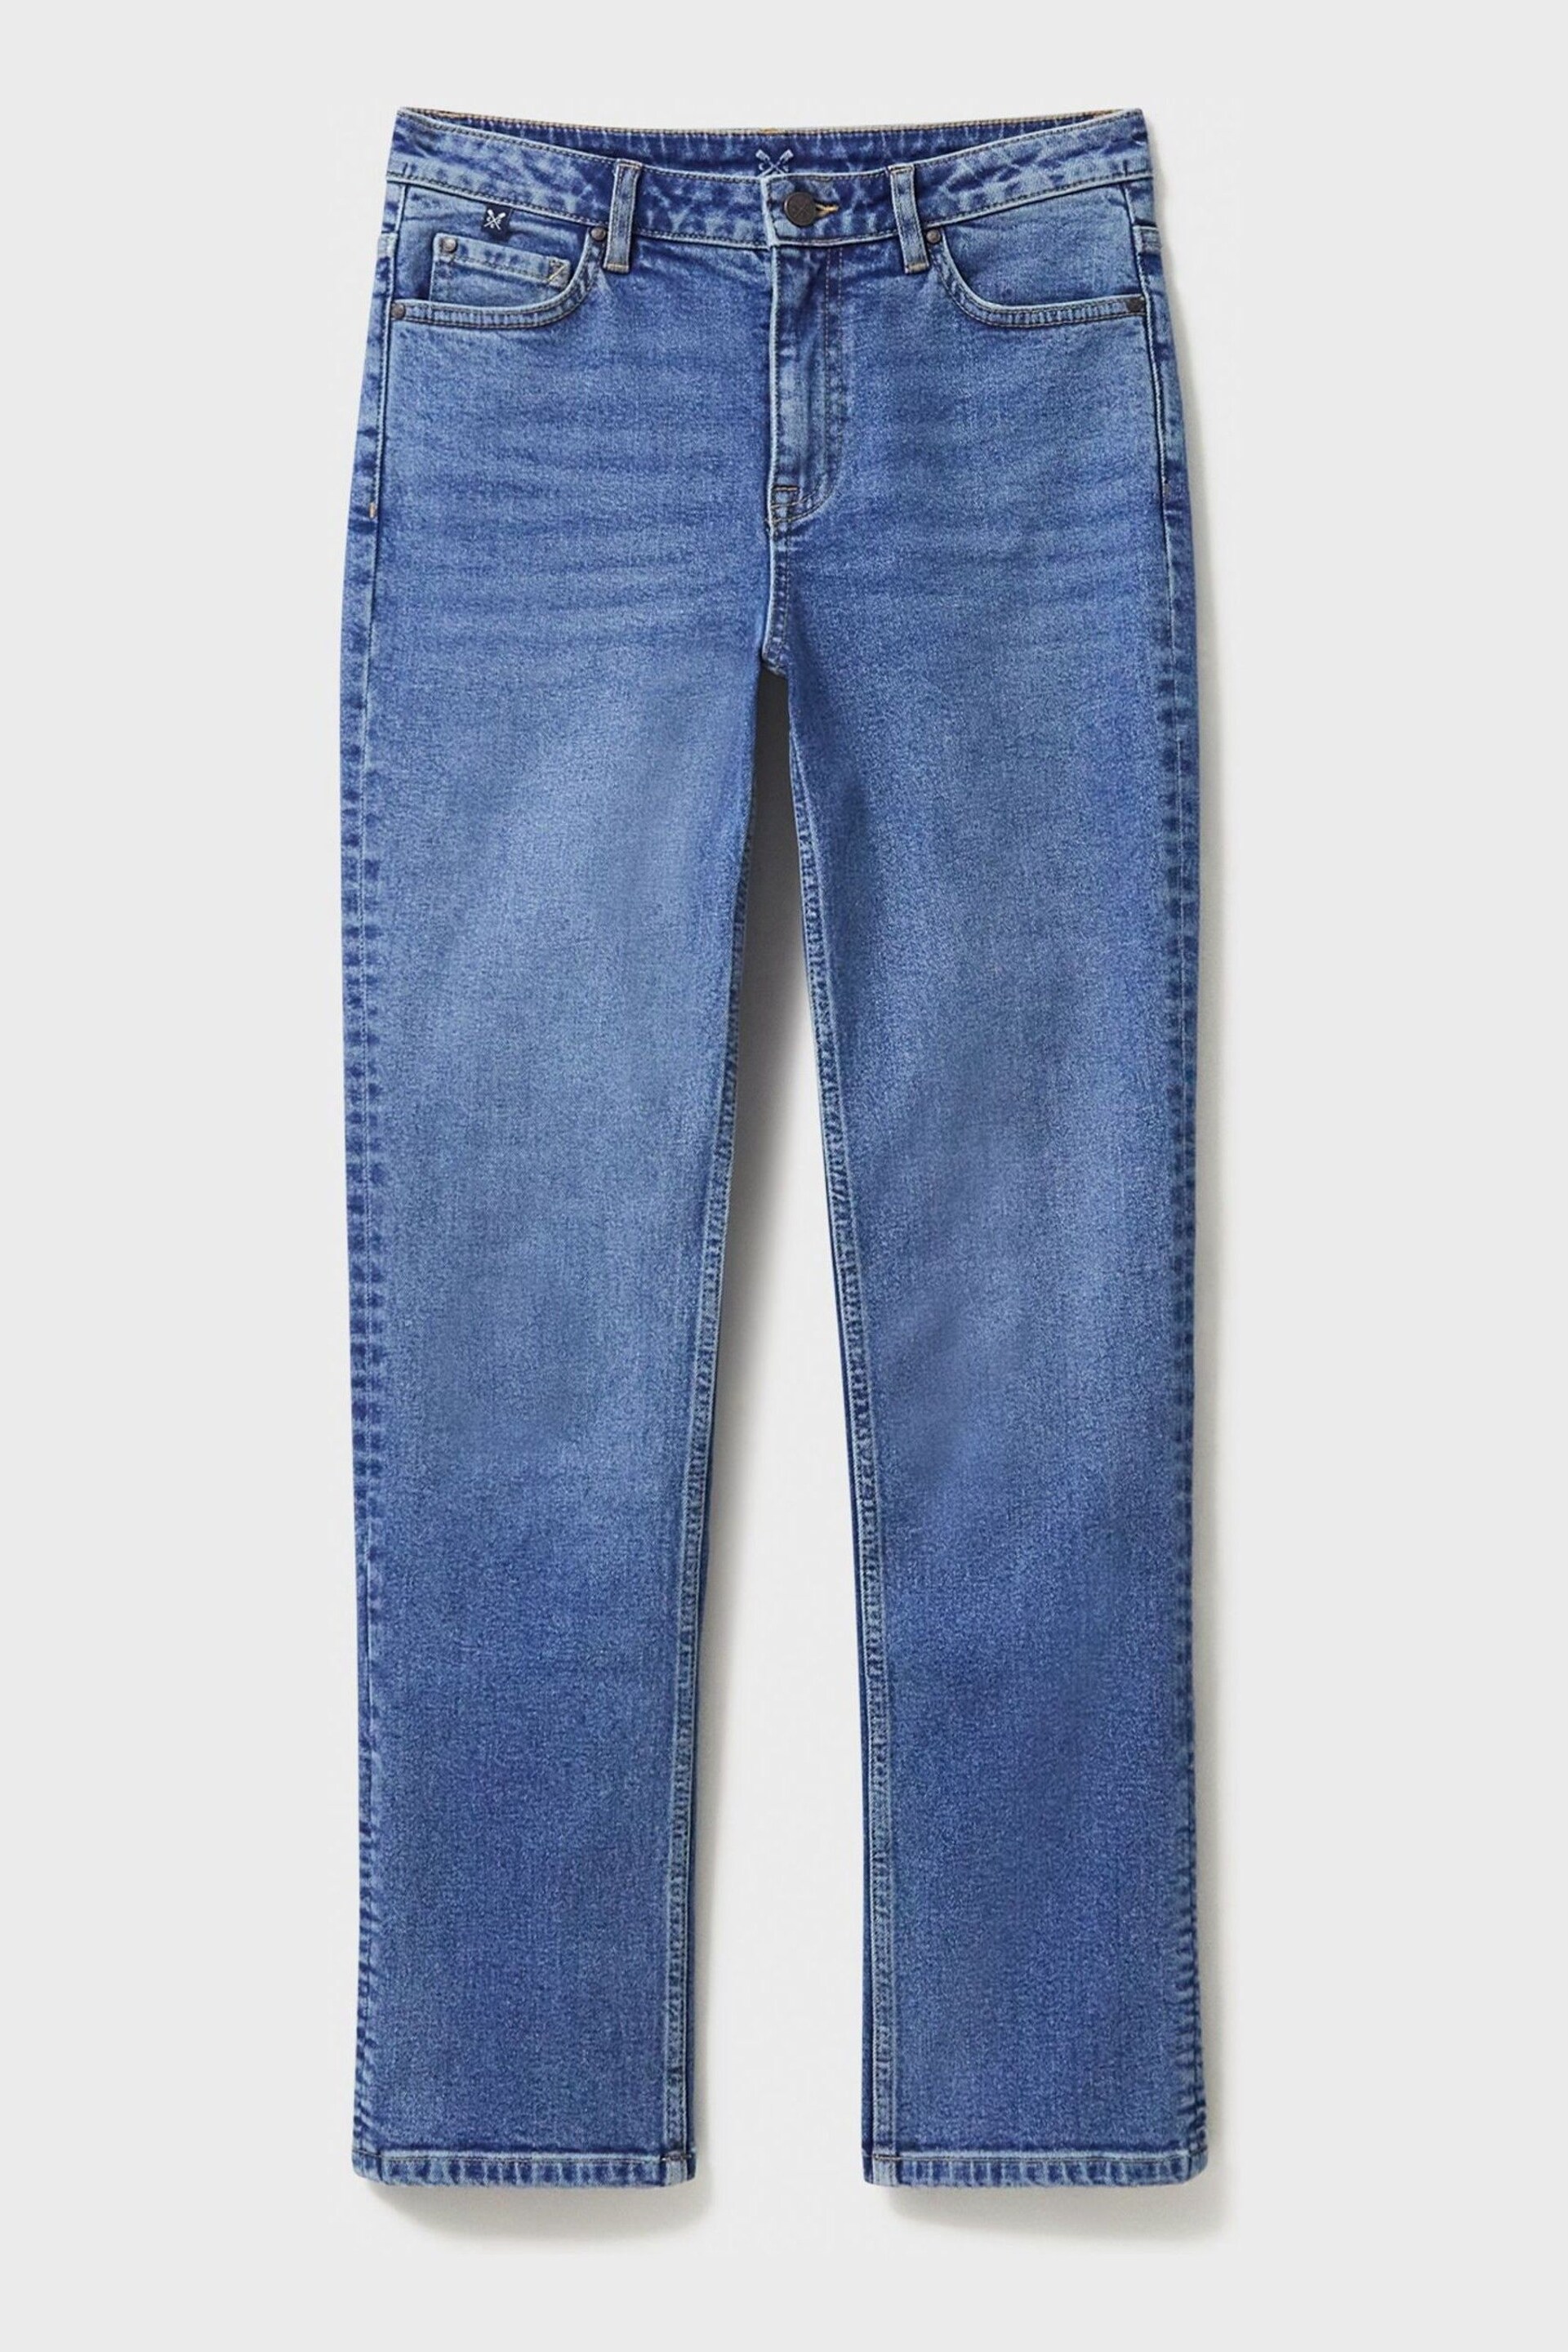 Crew Clothing Girlfriend Jeans - Image 6 of 6